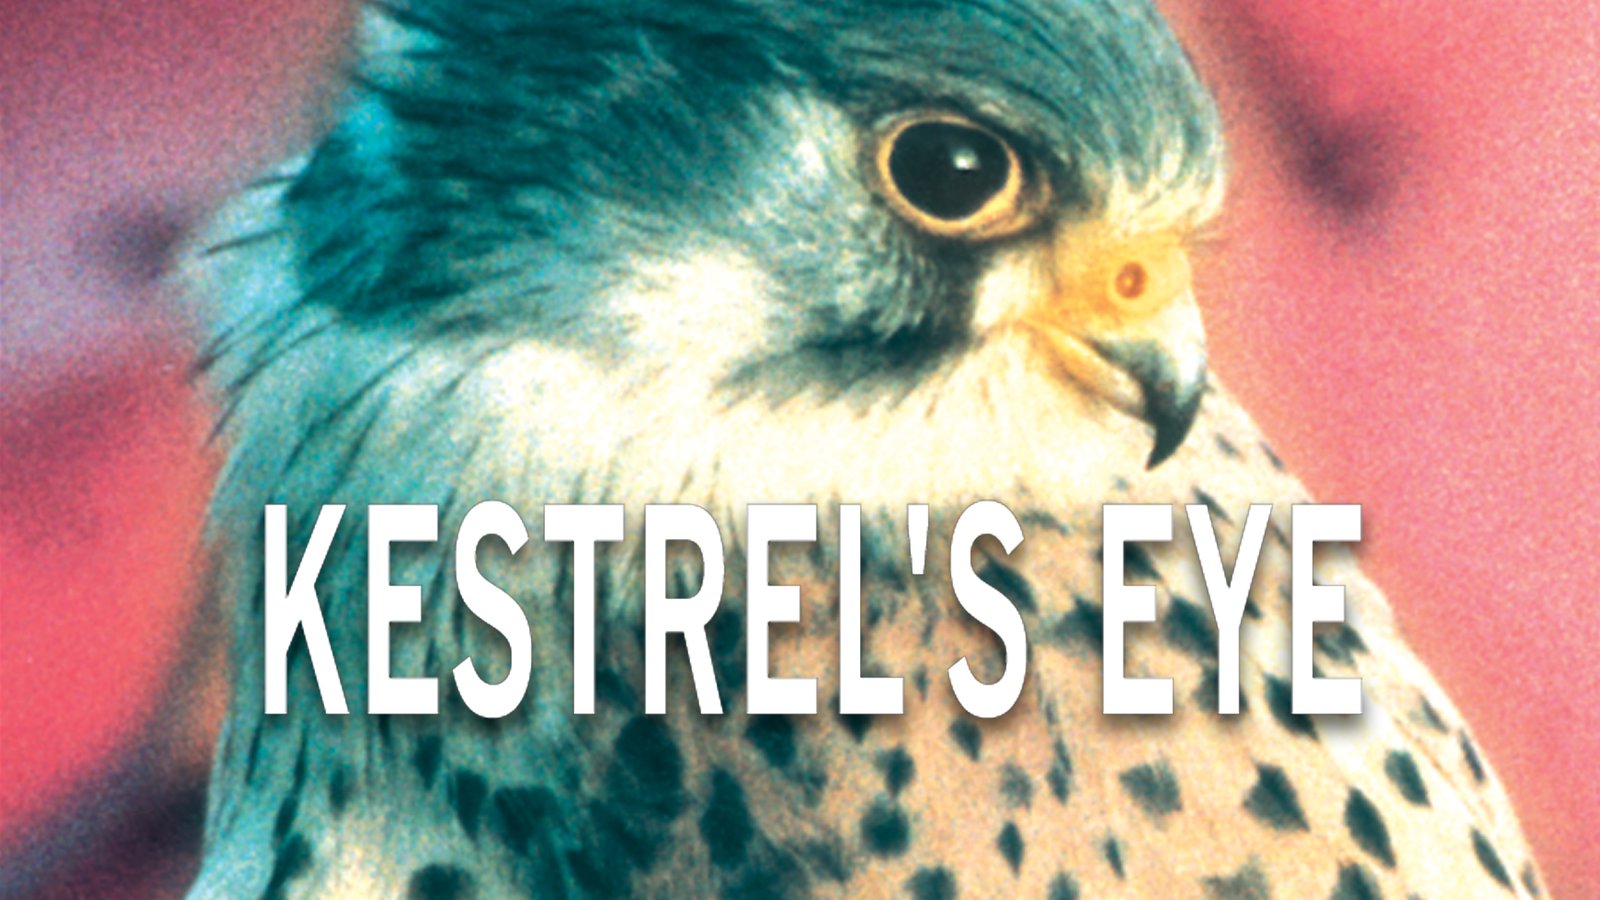 Kestrel's Eye - Life from a Bird's Perspective